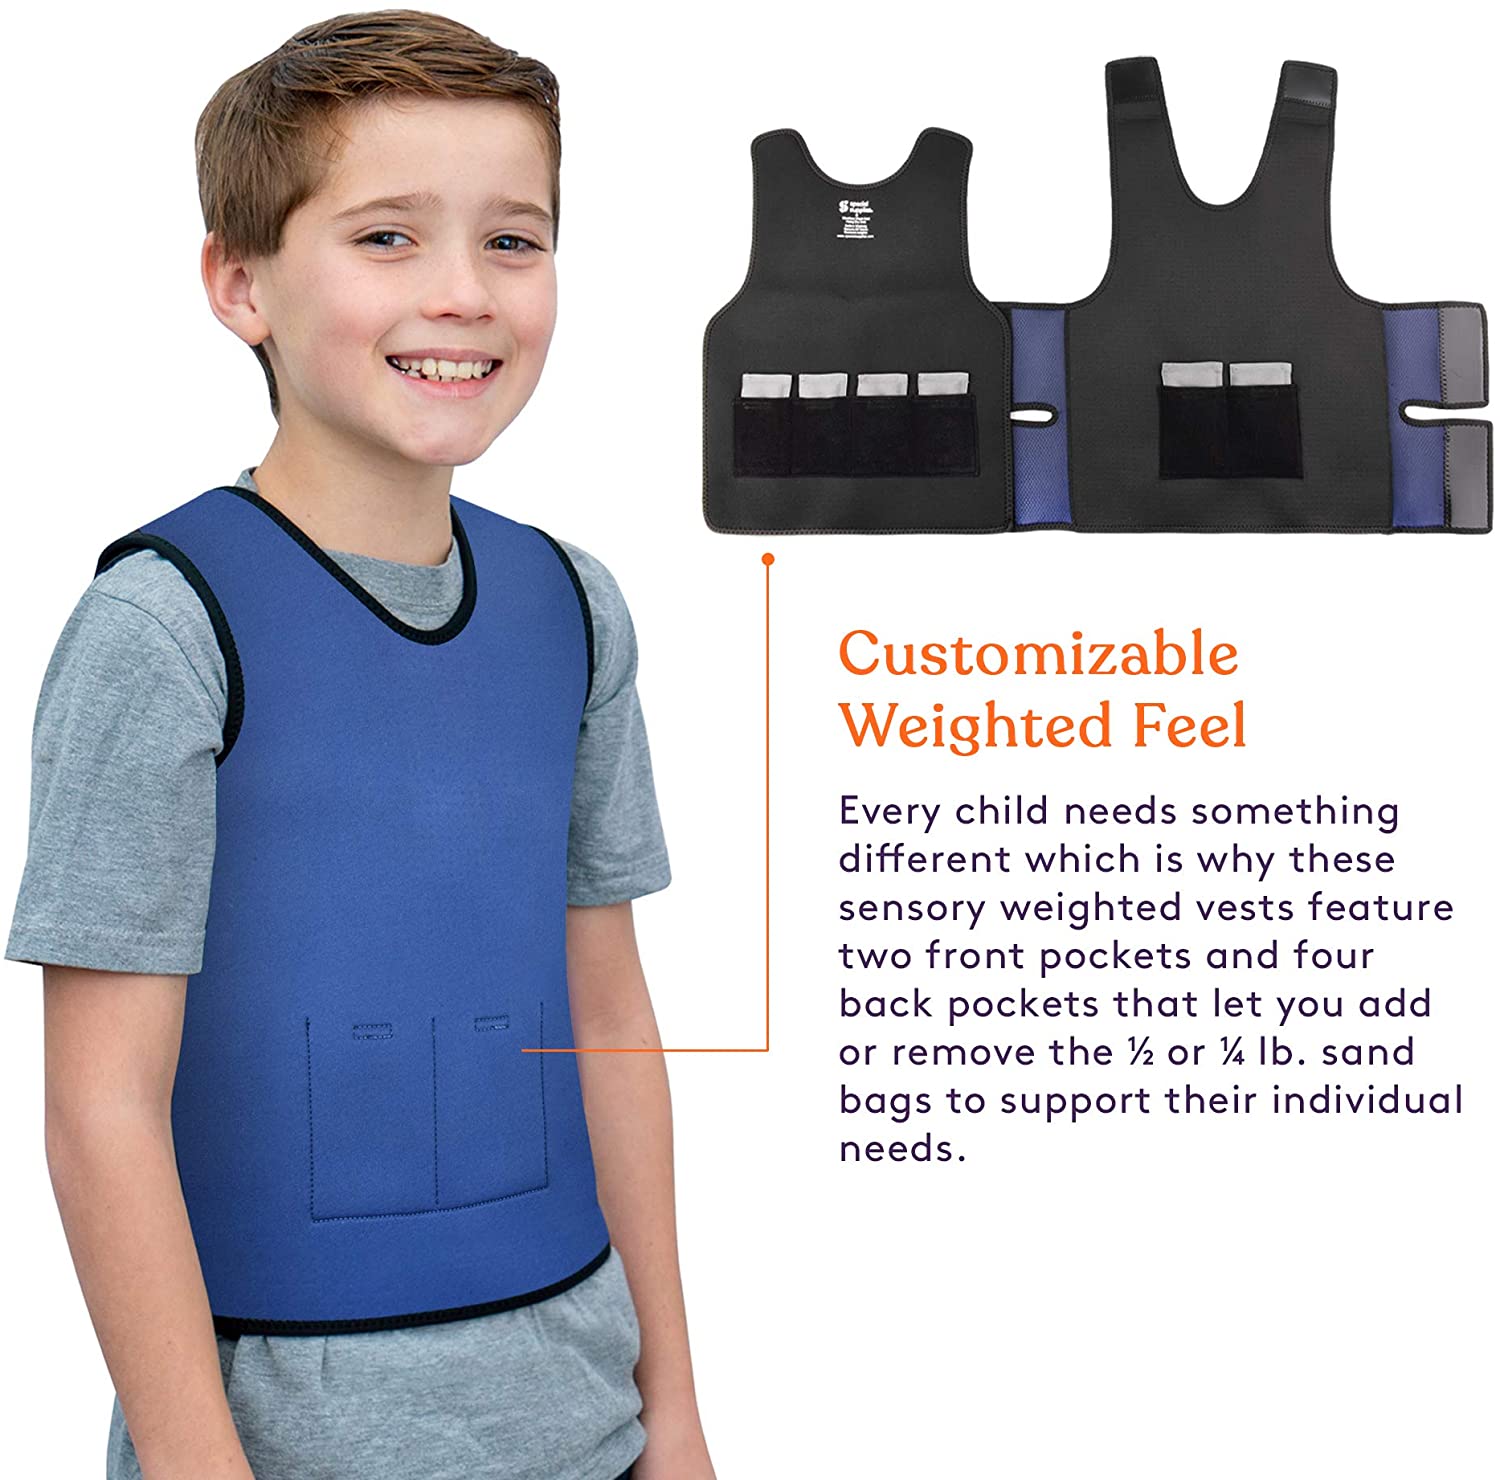 Special Supplies Weighted Sensory Compression Vest for Kids with